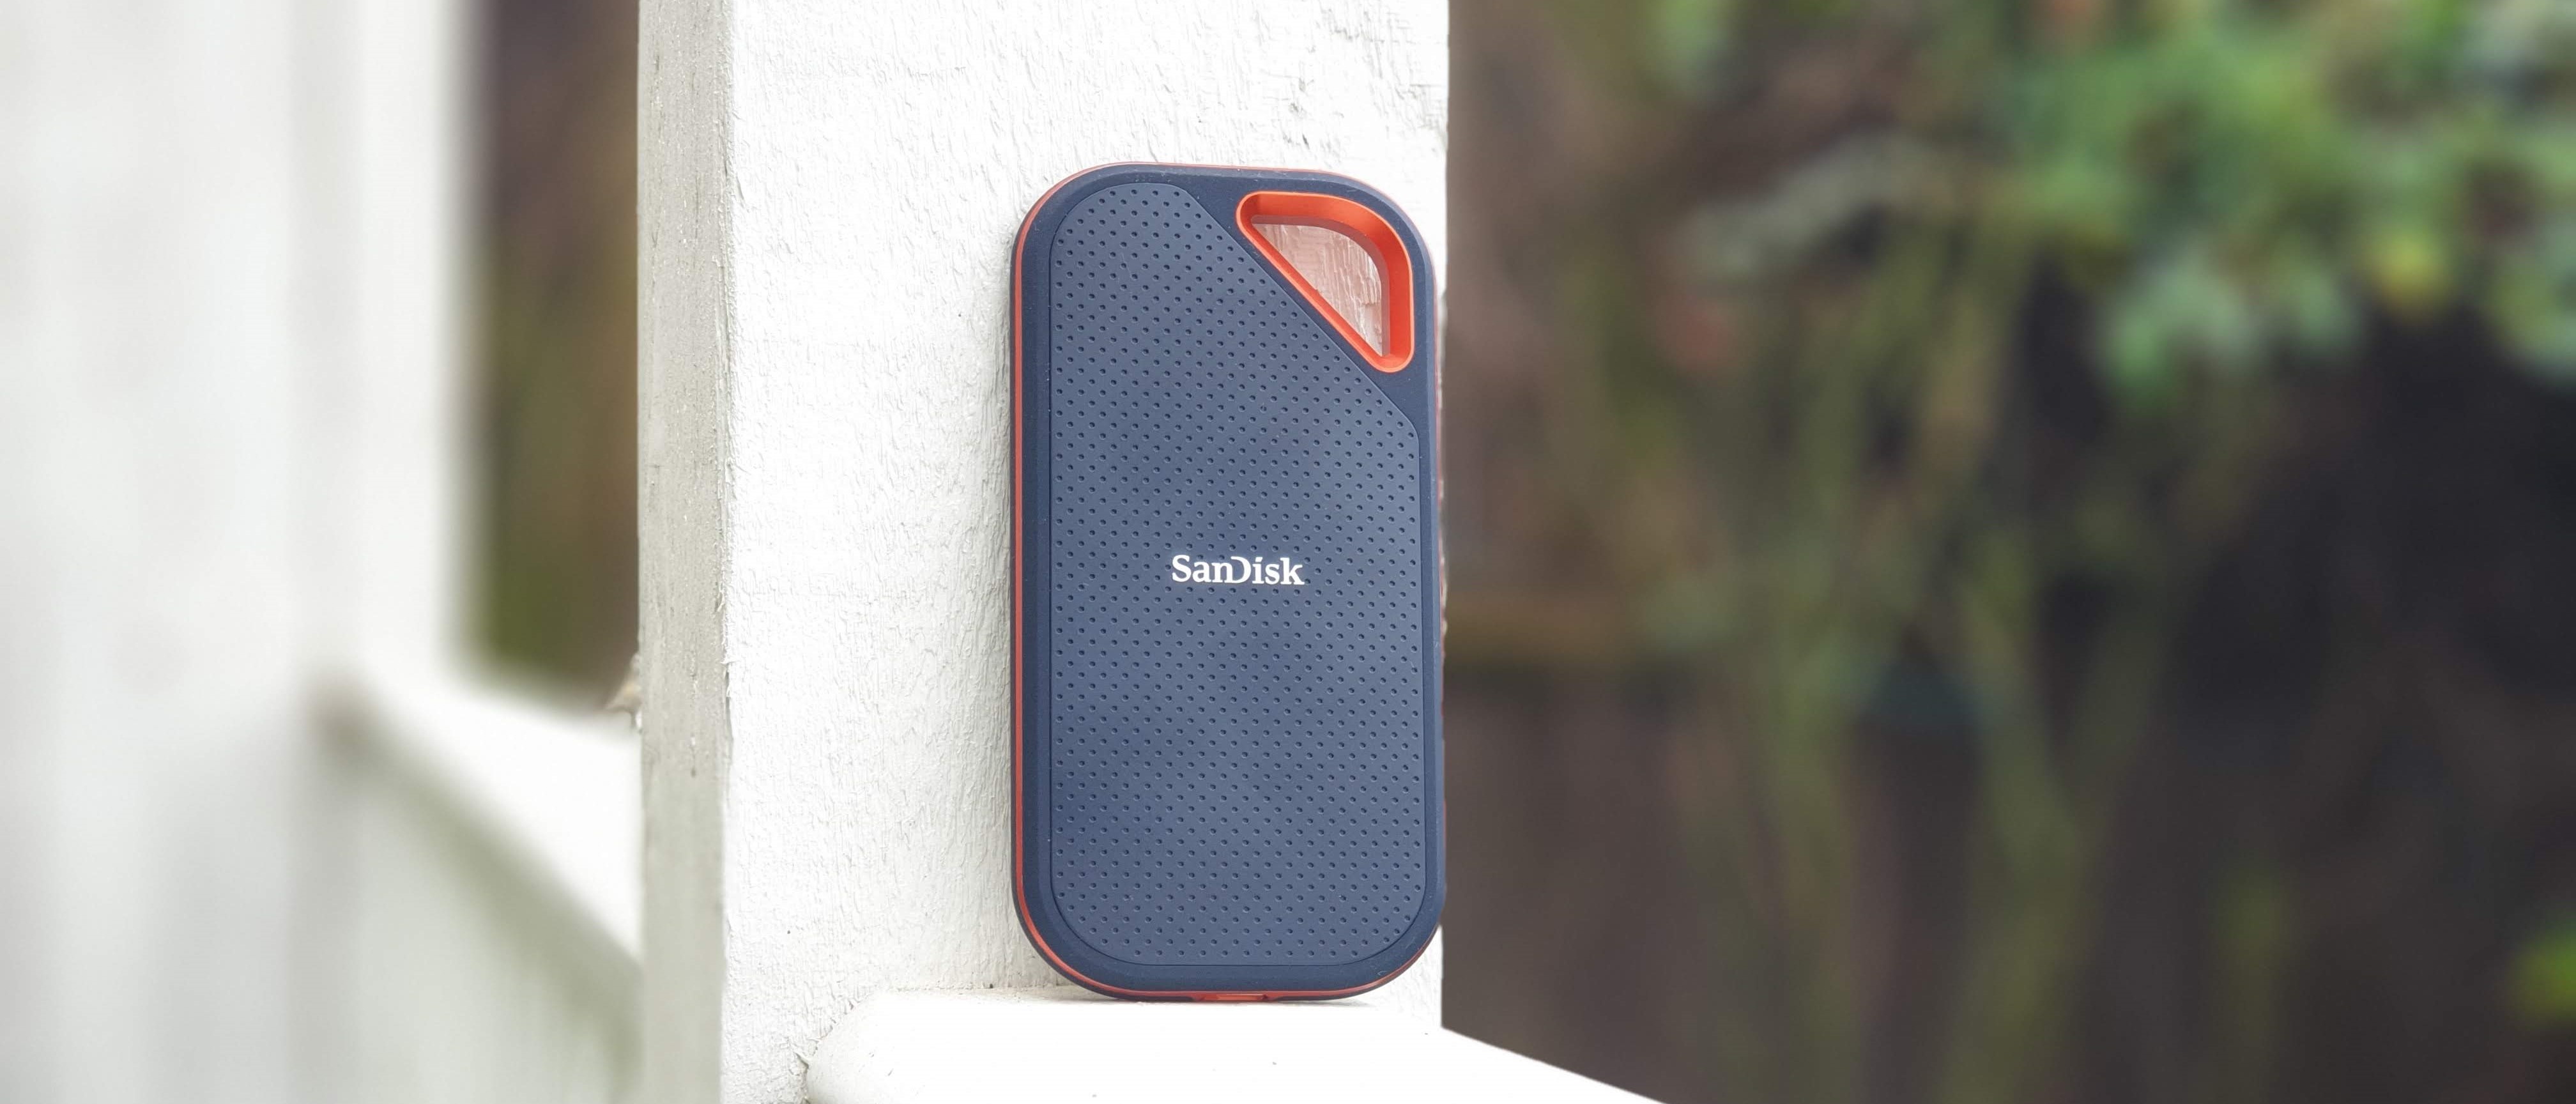 WD is facing a class action lawsuit from users of Sandisk external SSD ...